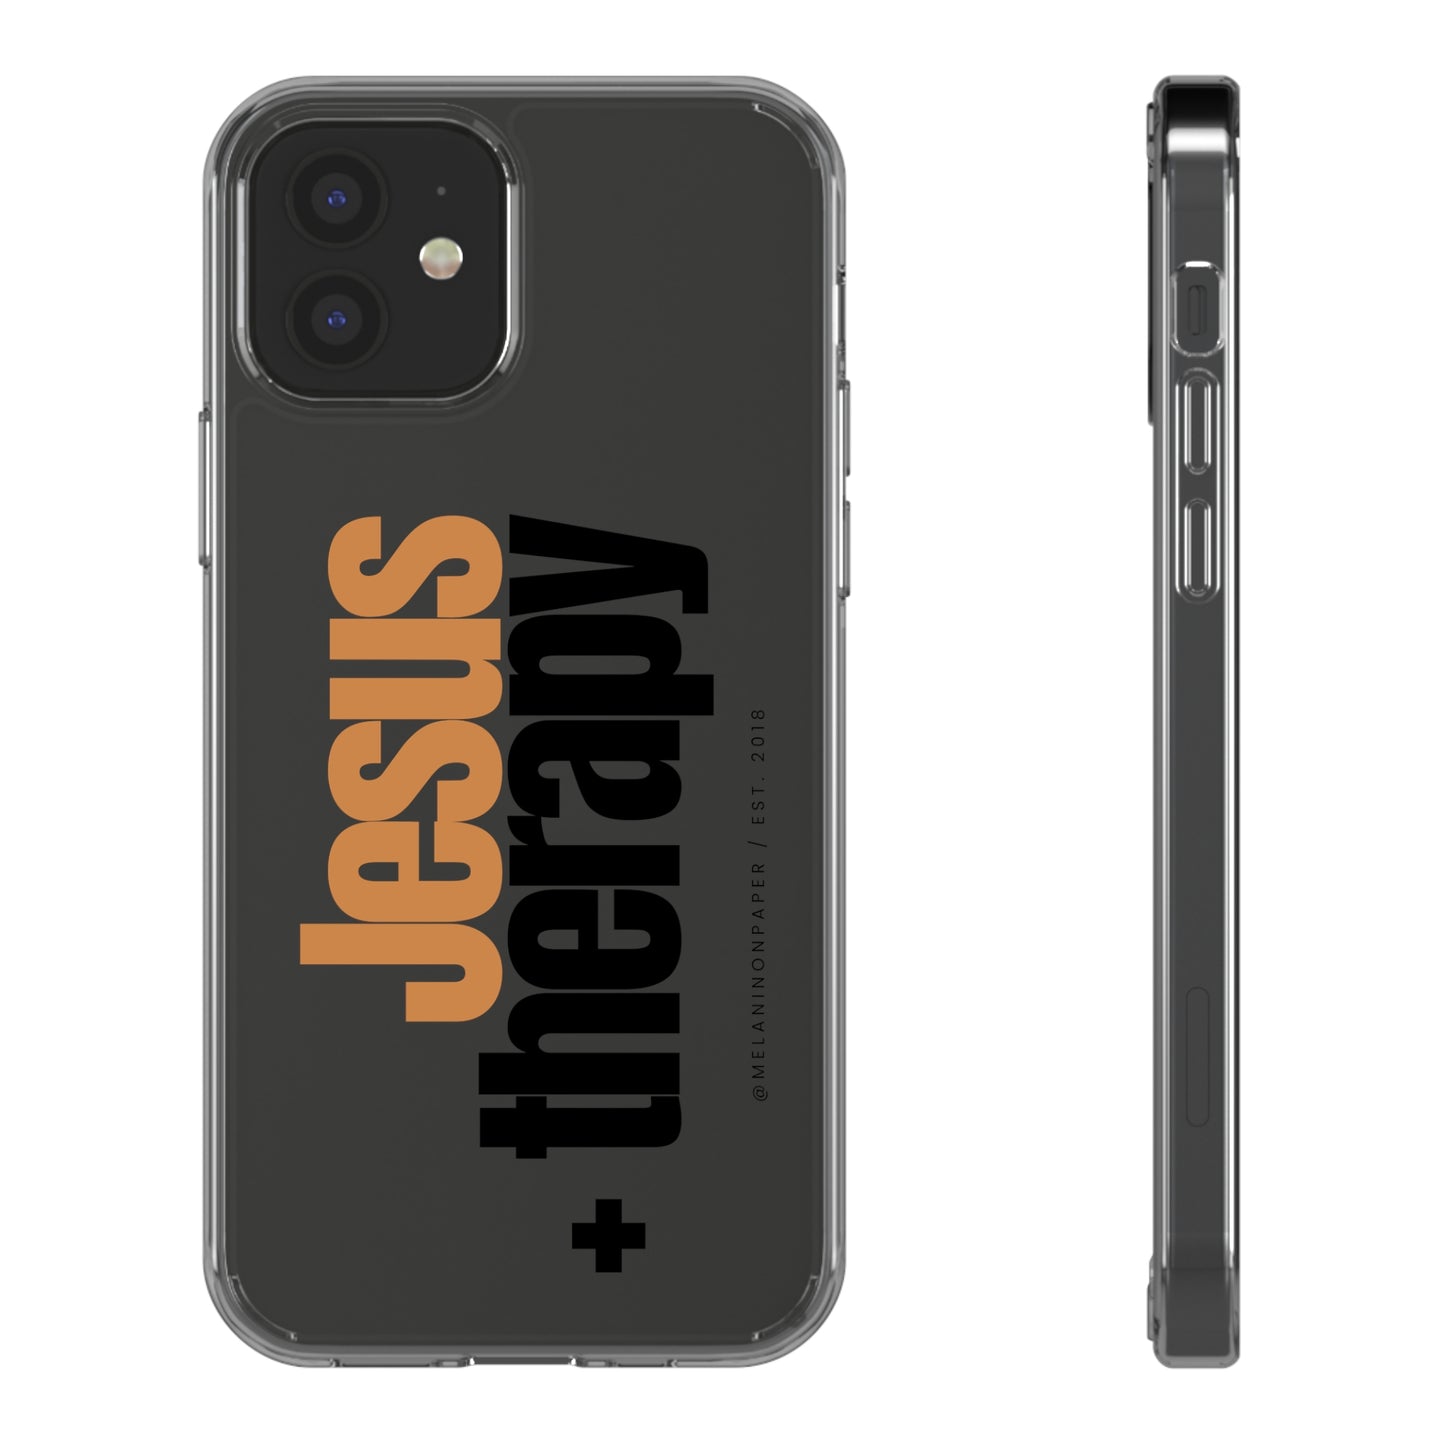 "Jesus + therapy" Clear Phone Cases - black & gold